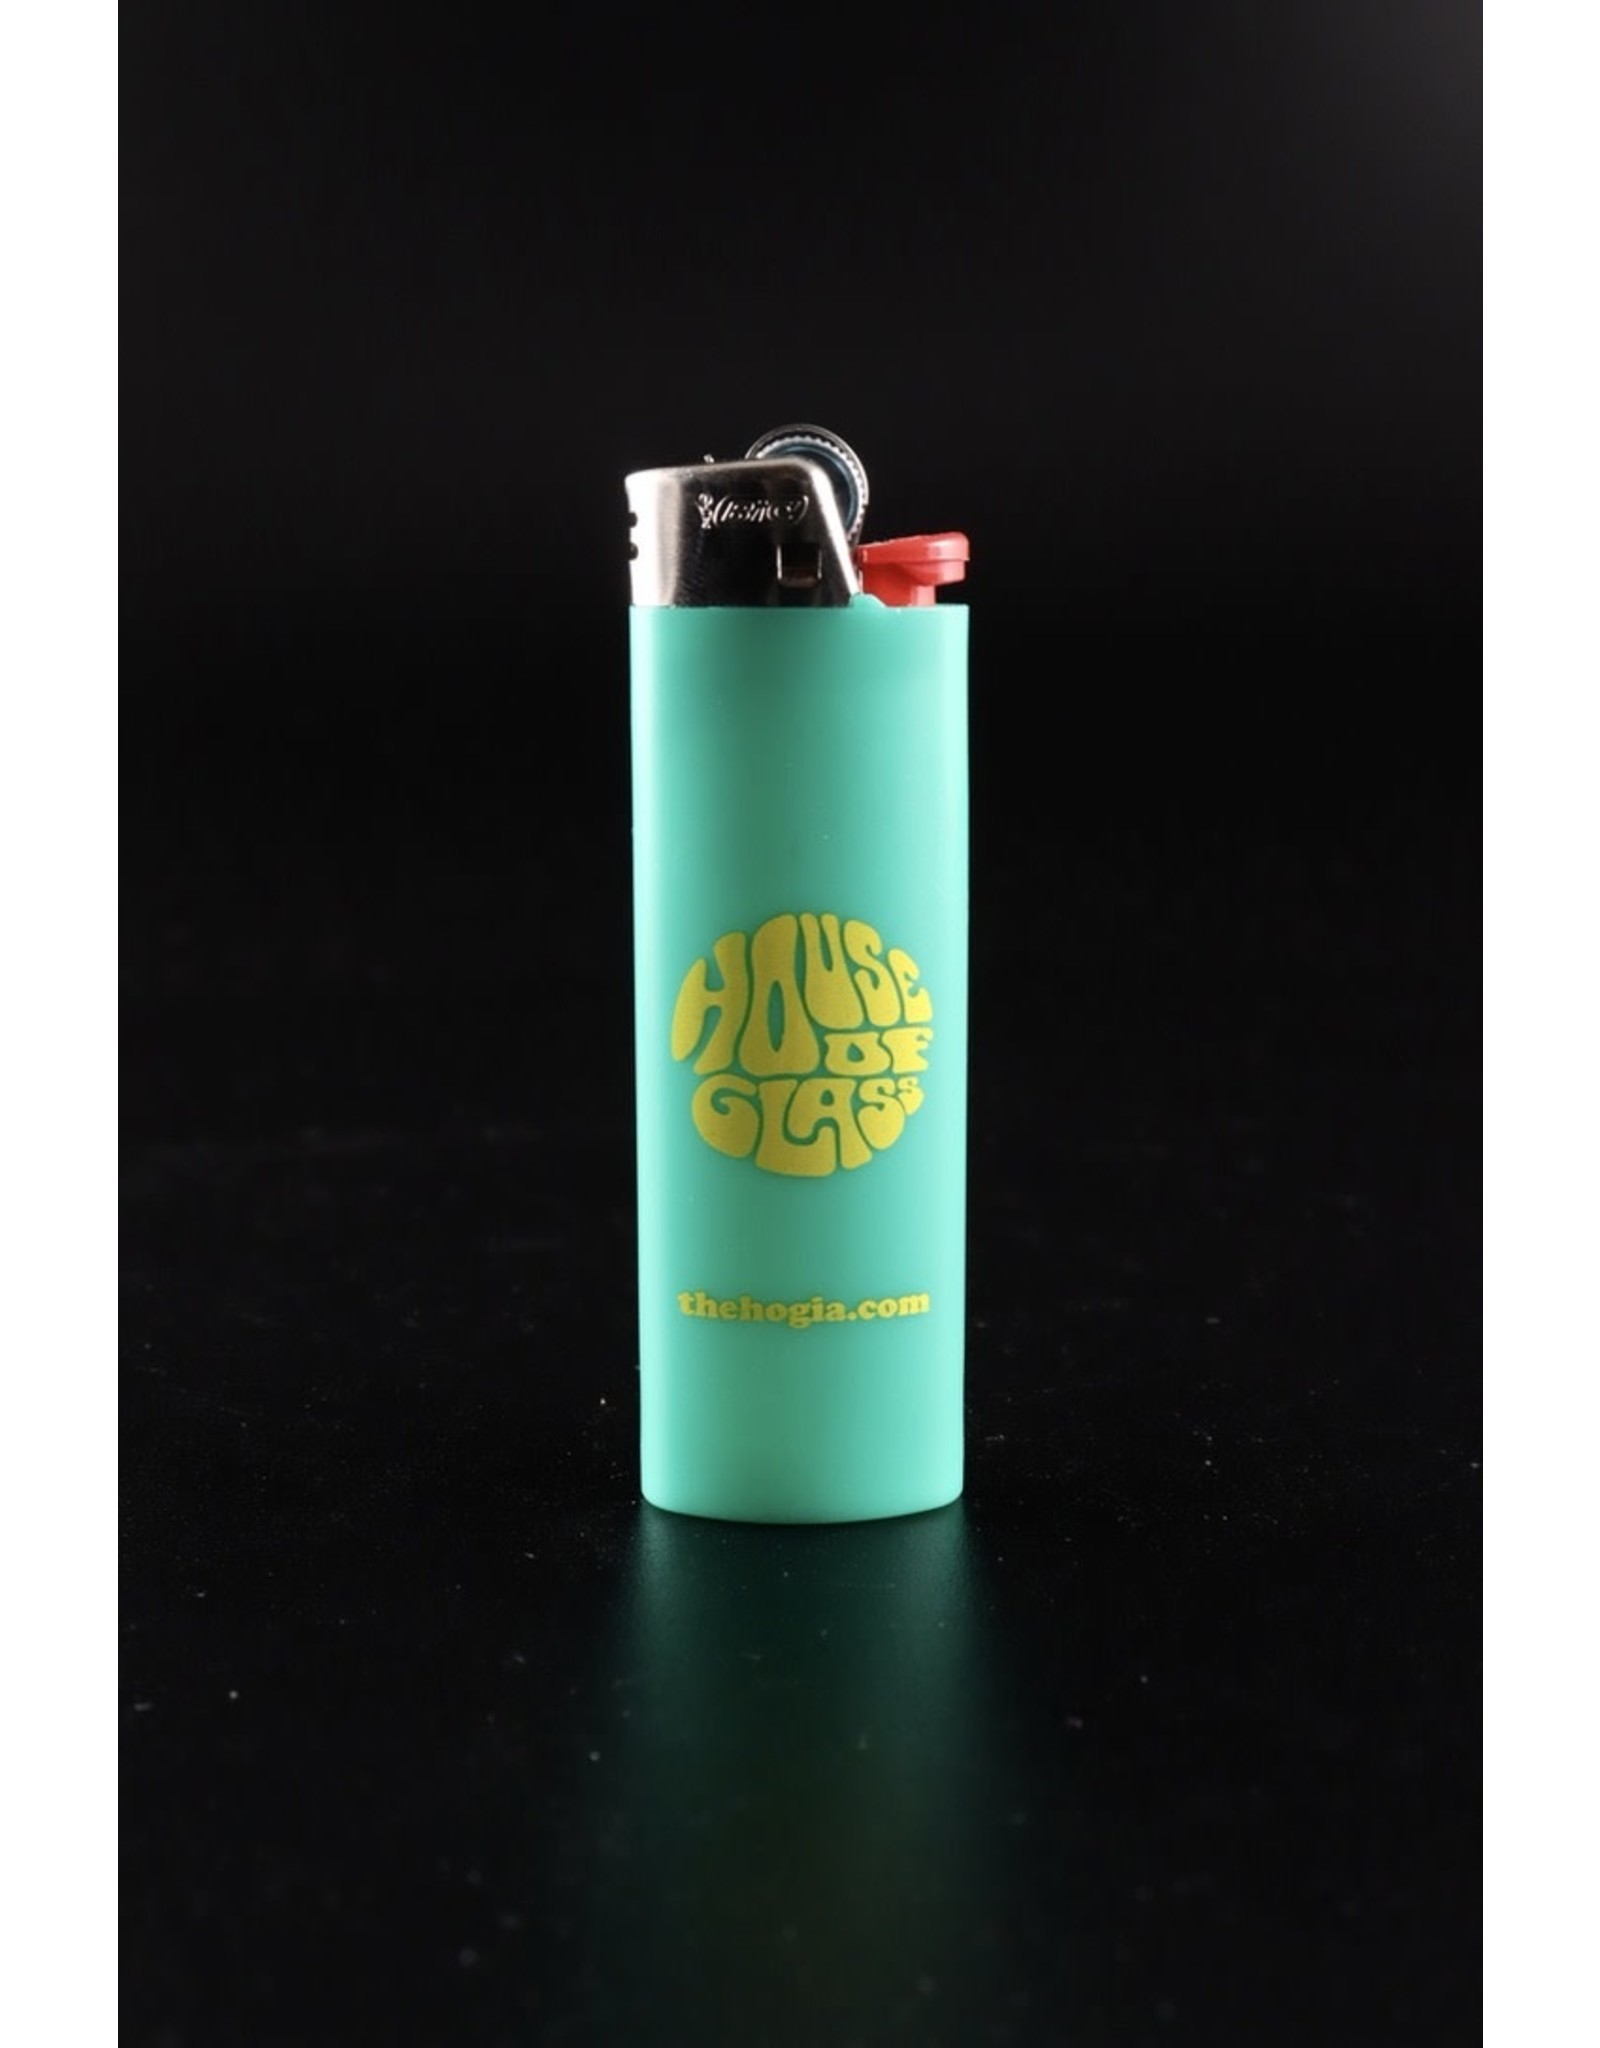 House of Glass House of Glass Promo Lighter